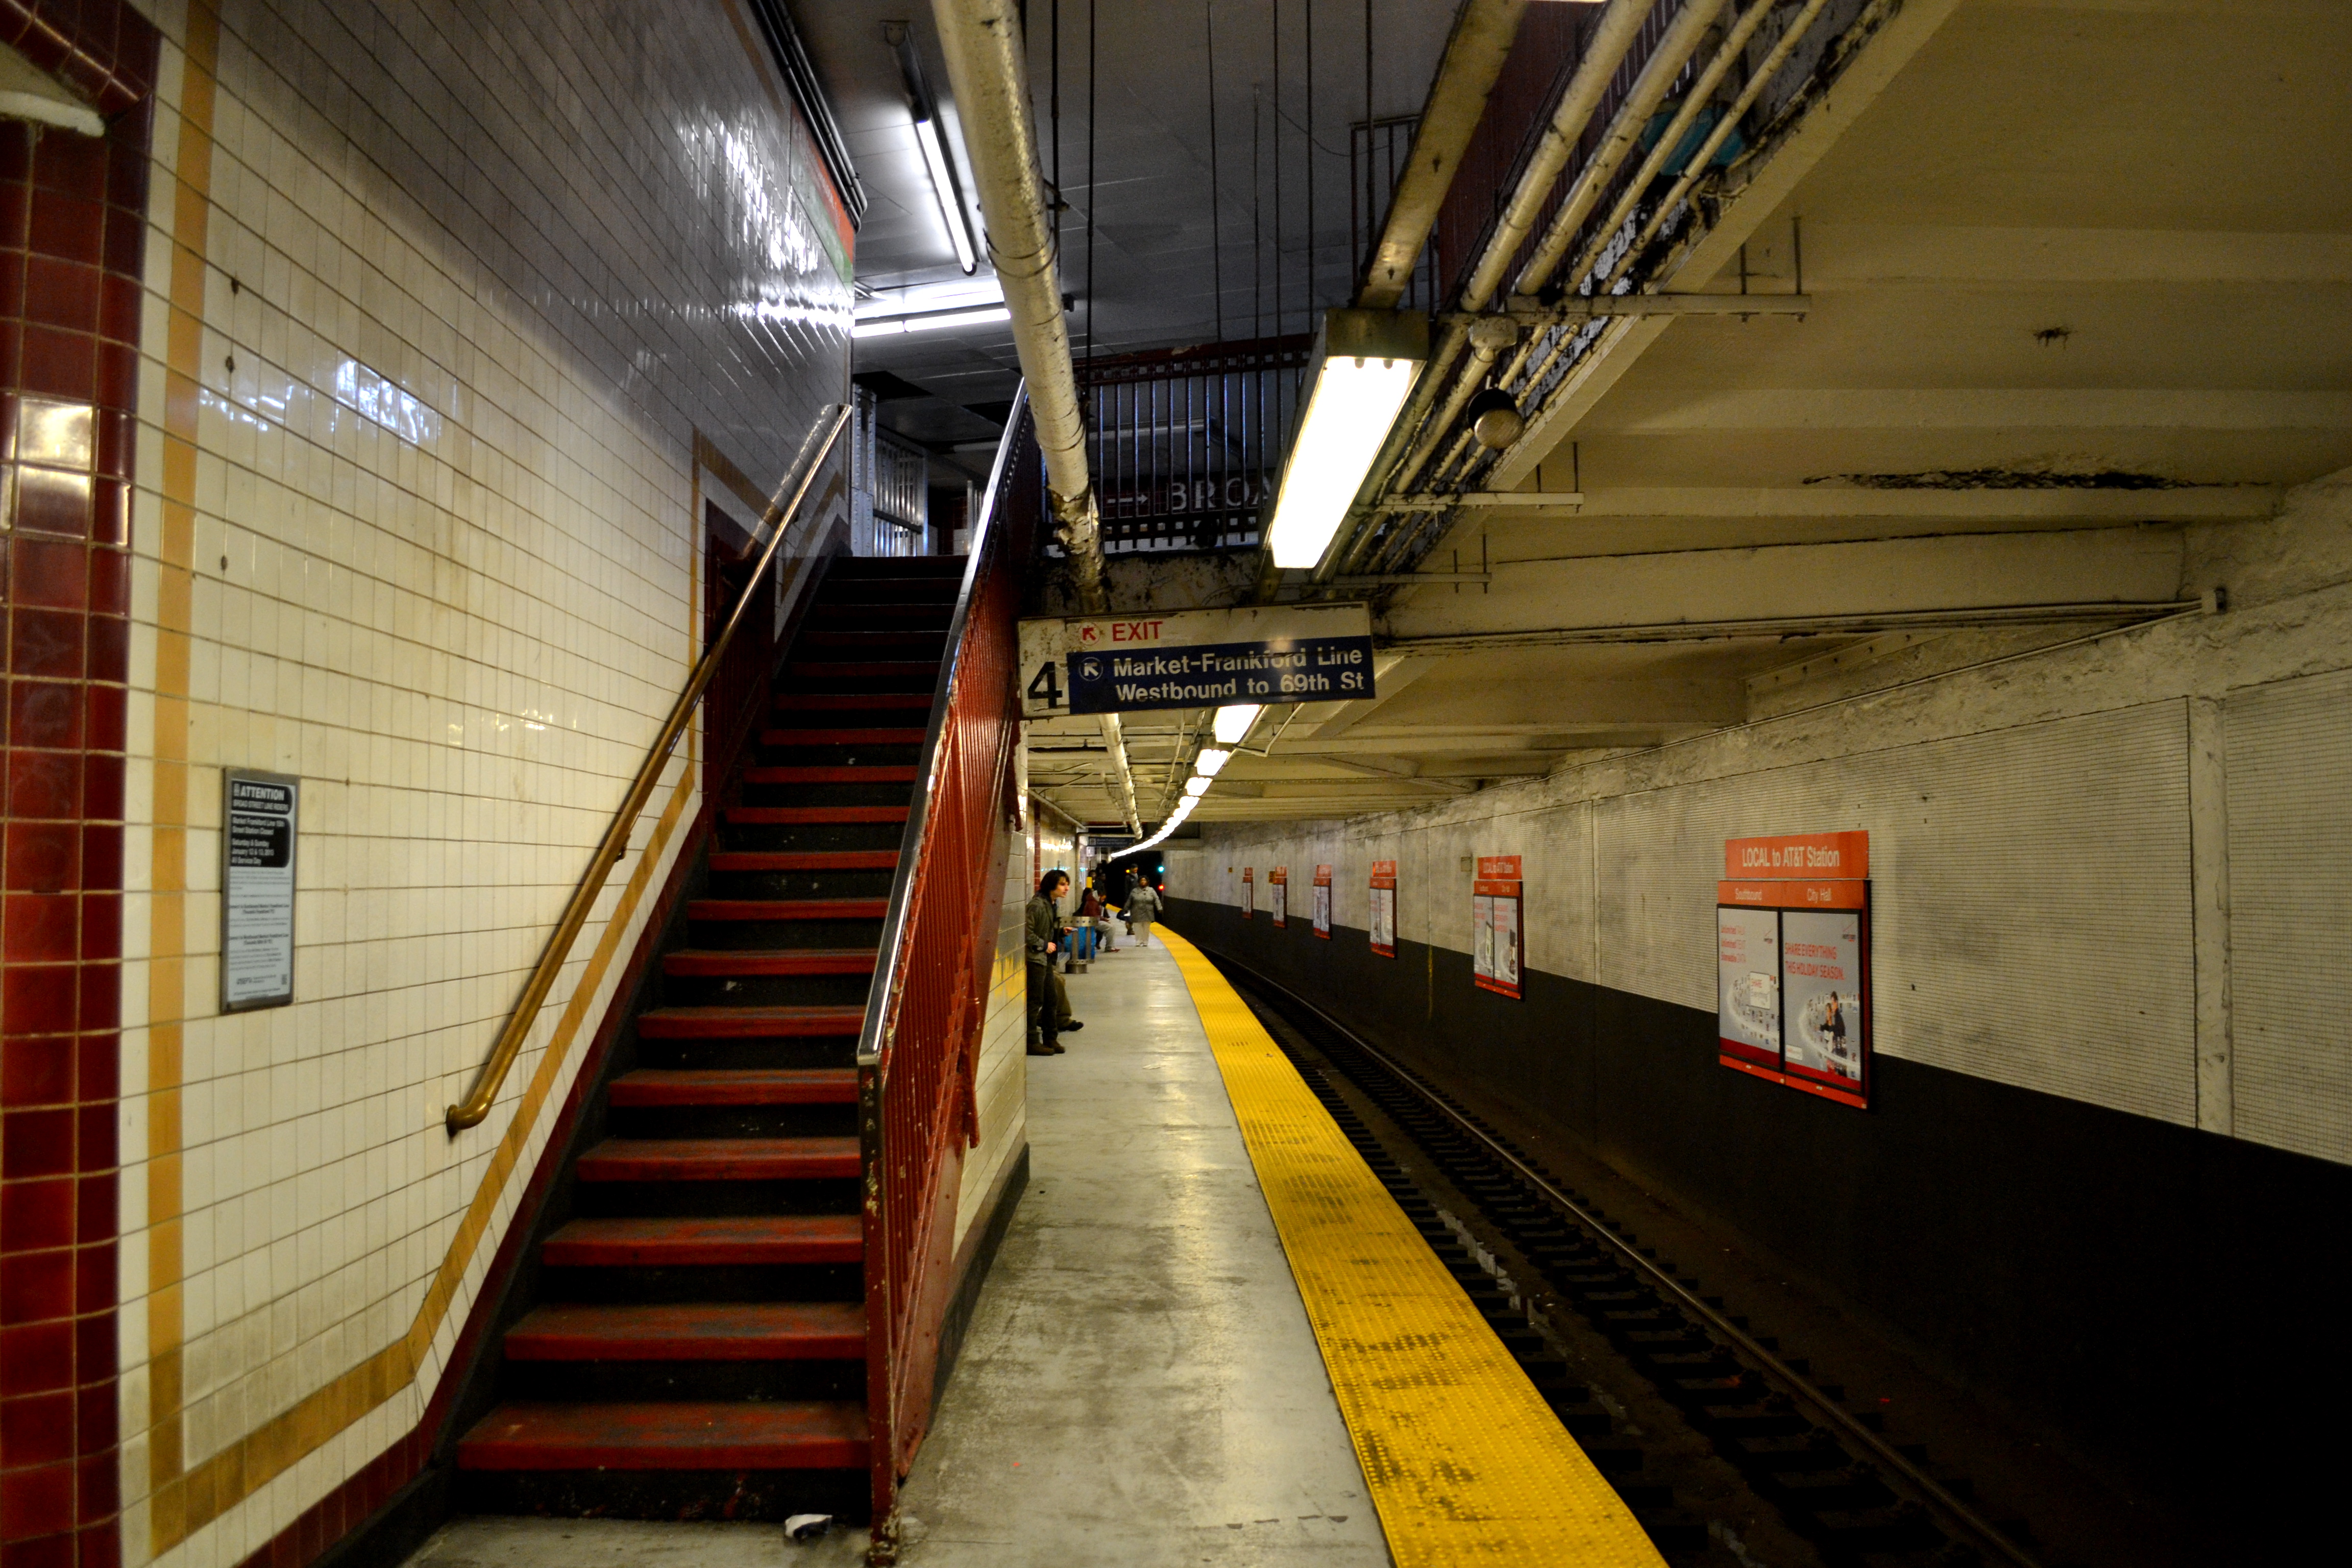 The long-awaited overhaul of City Hall and 15th Street stations will begin summer 2016.